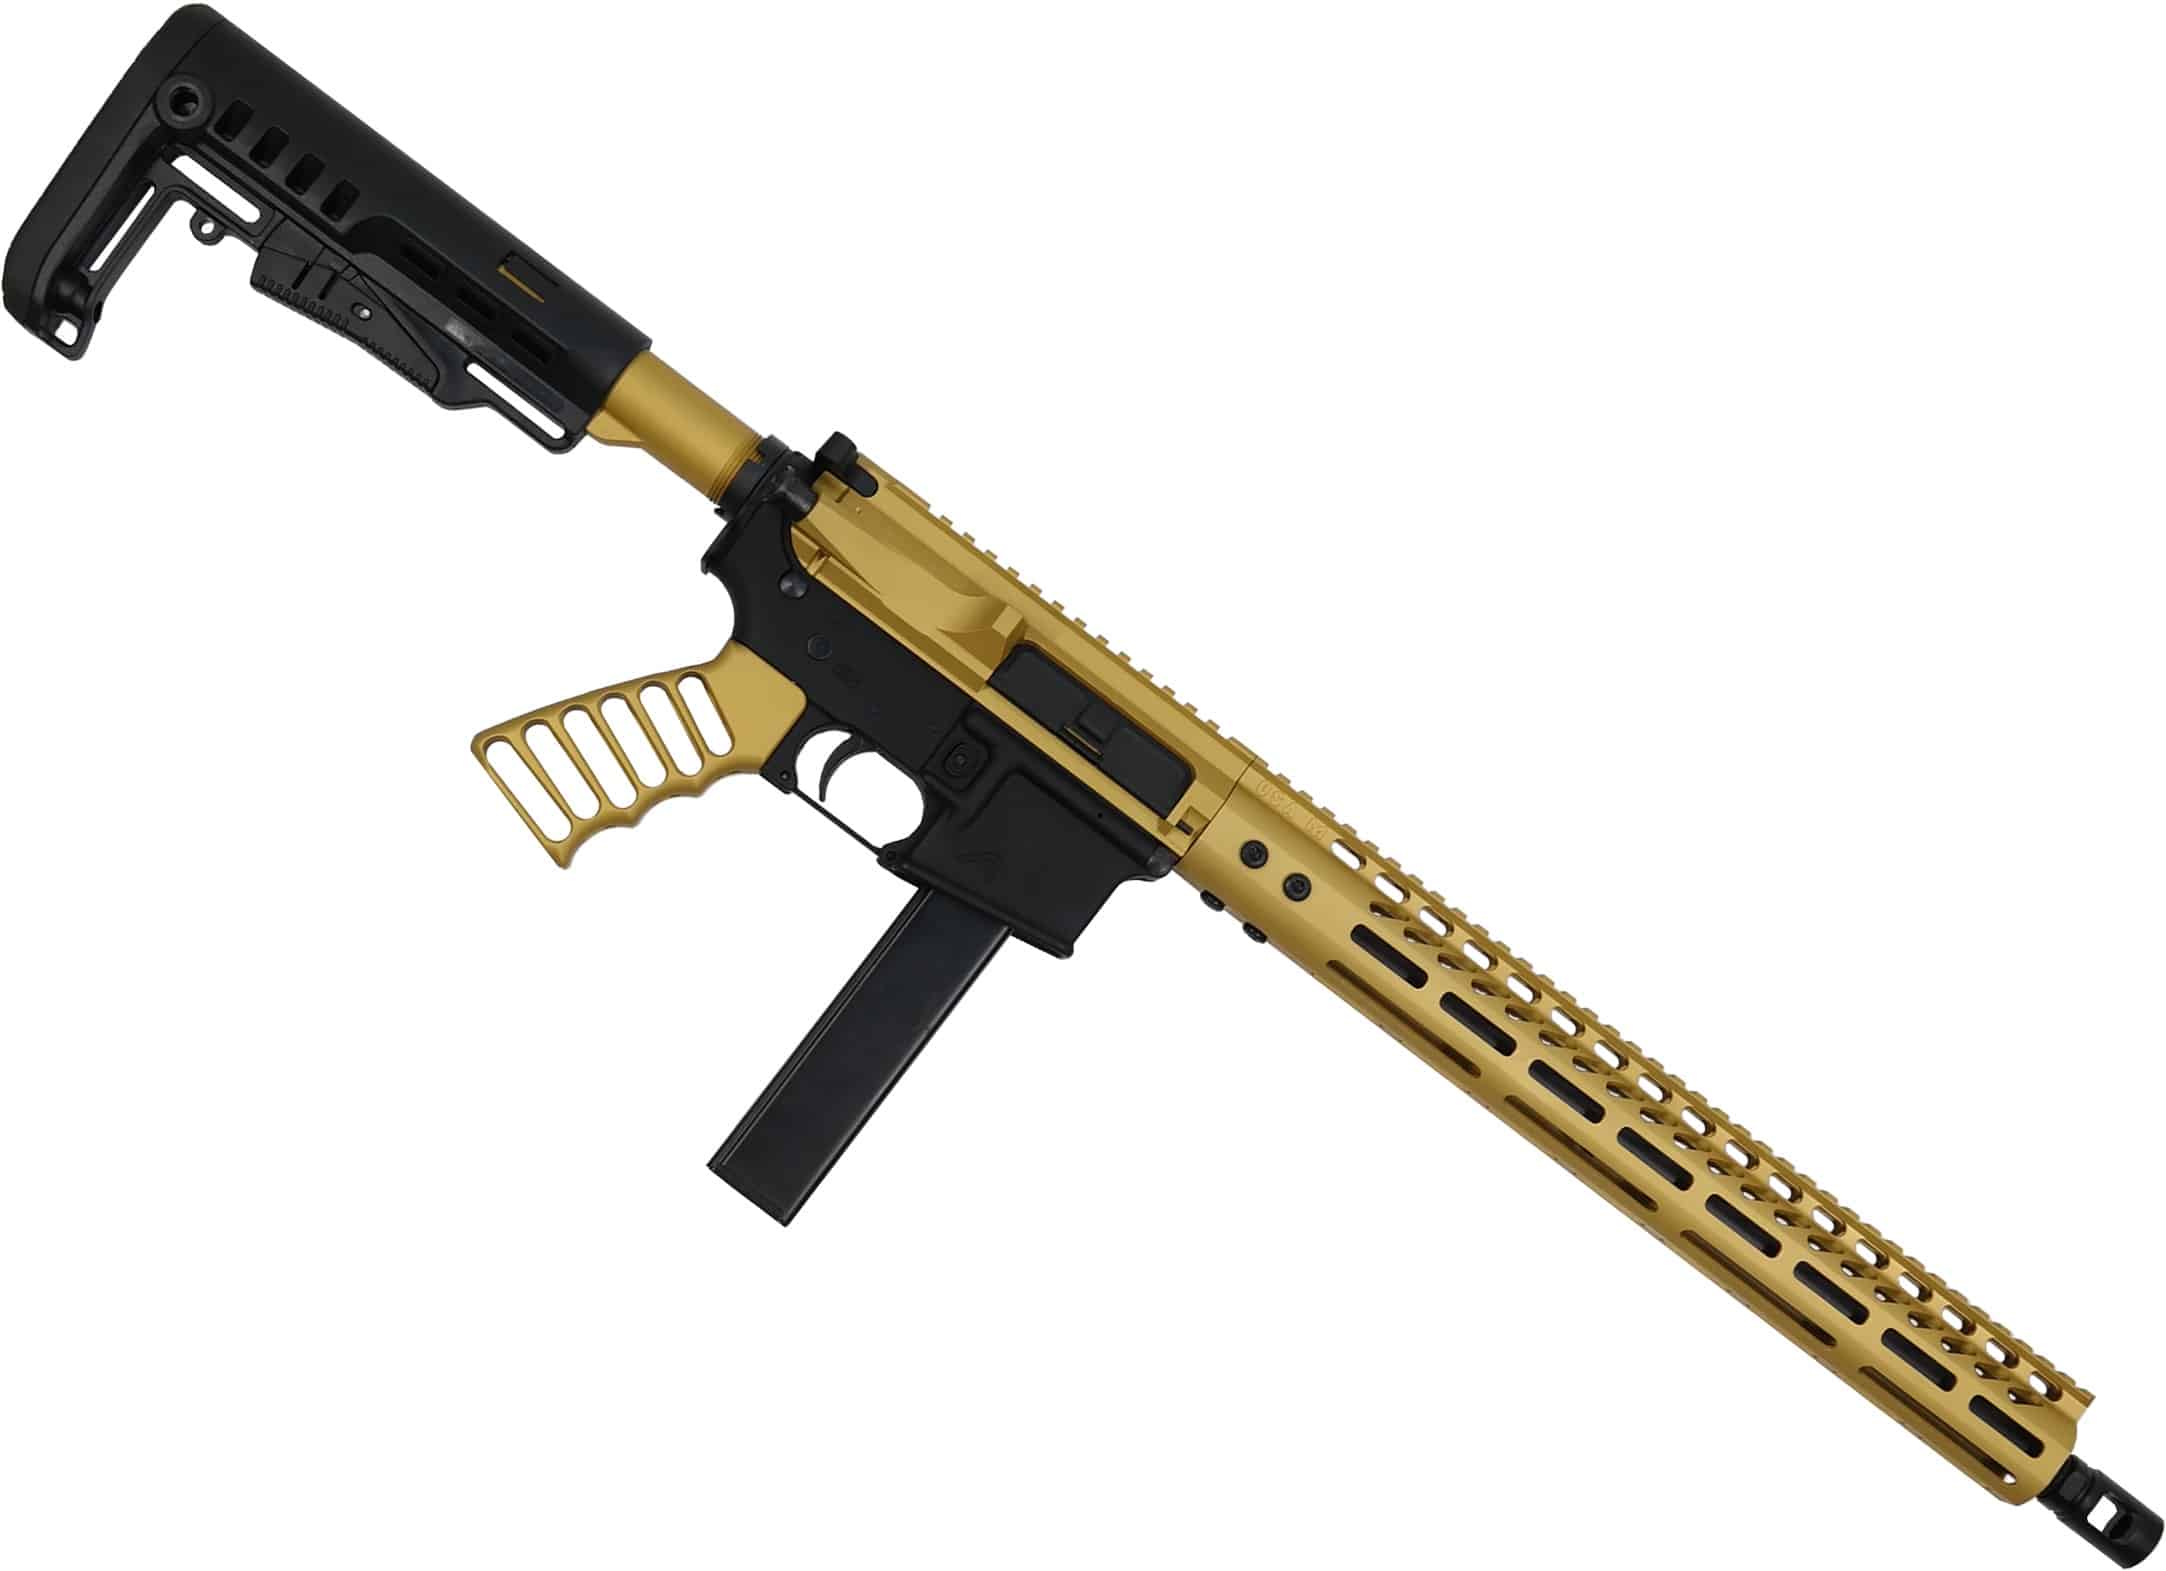 ar15-9mm-carbine-upper-receiver-in-anodizded-gold-pcc-usa-made